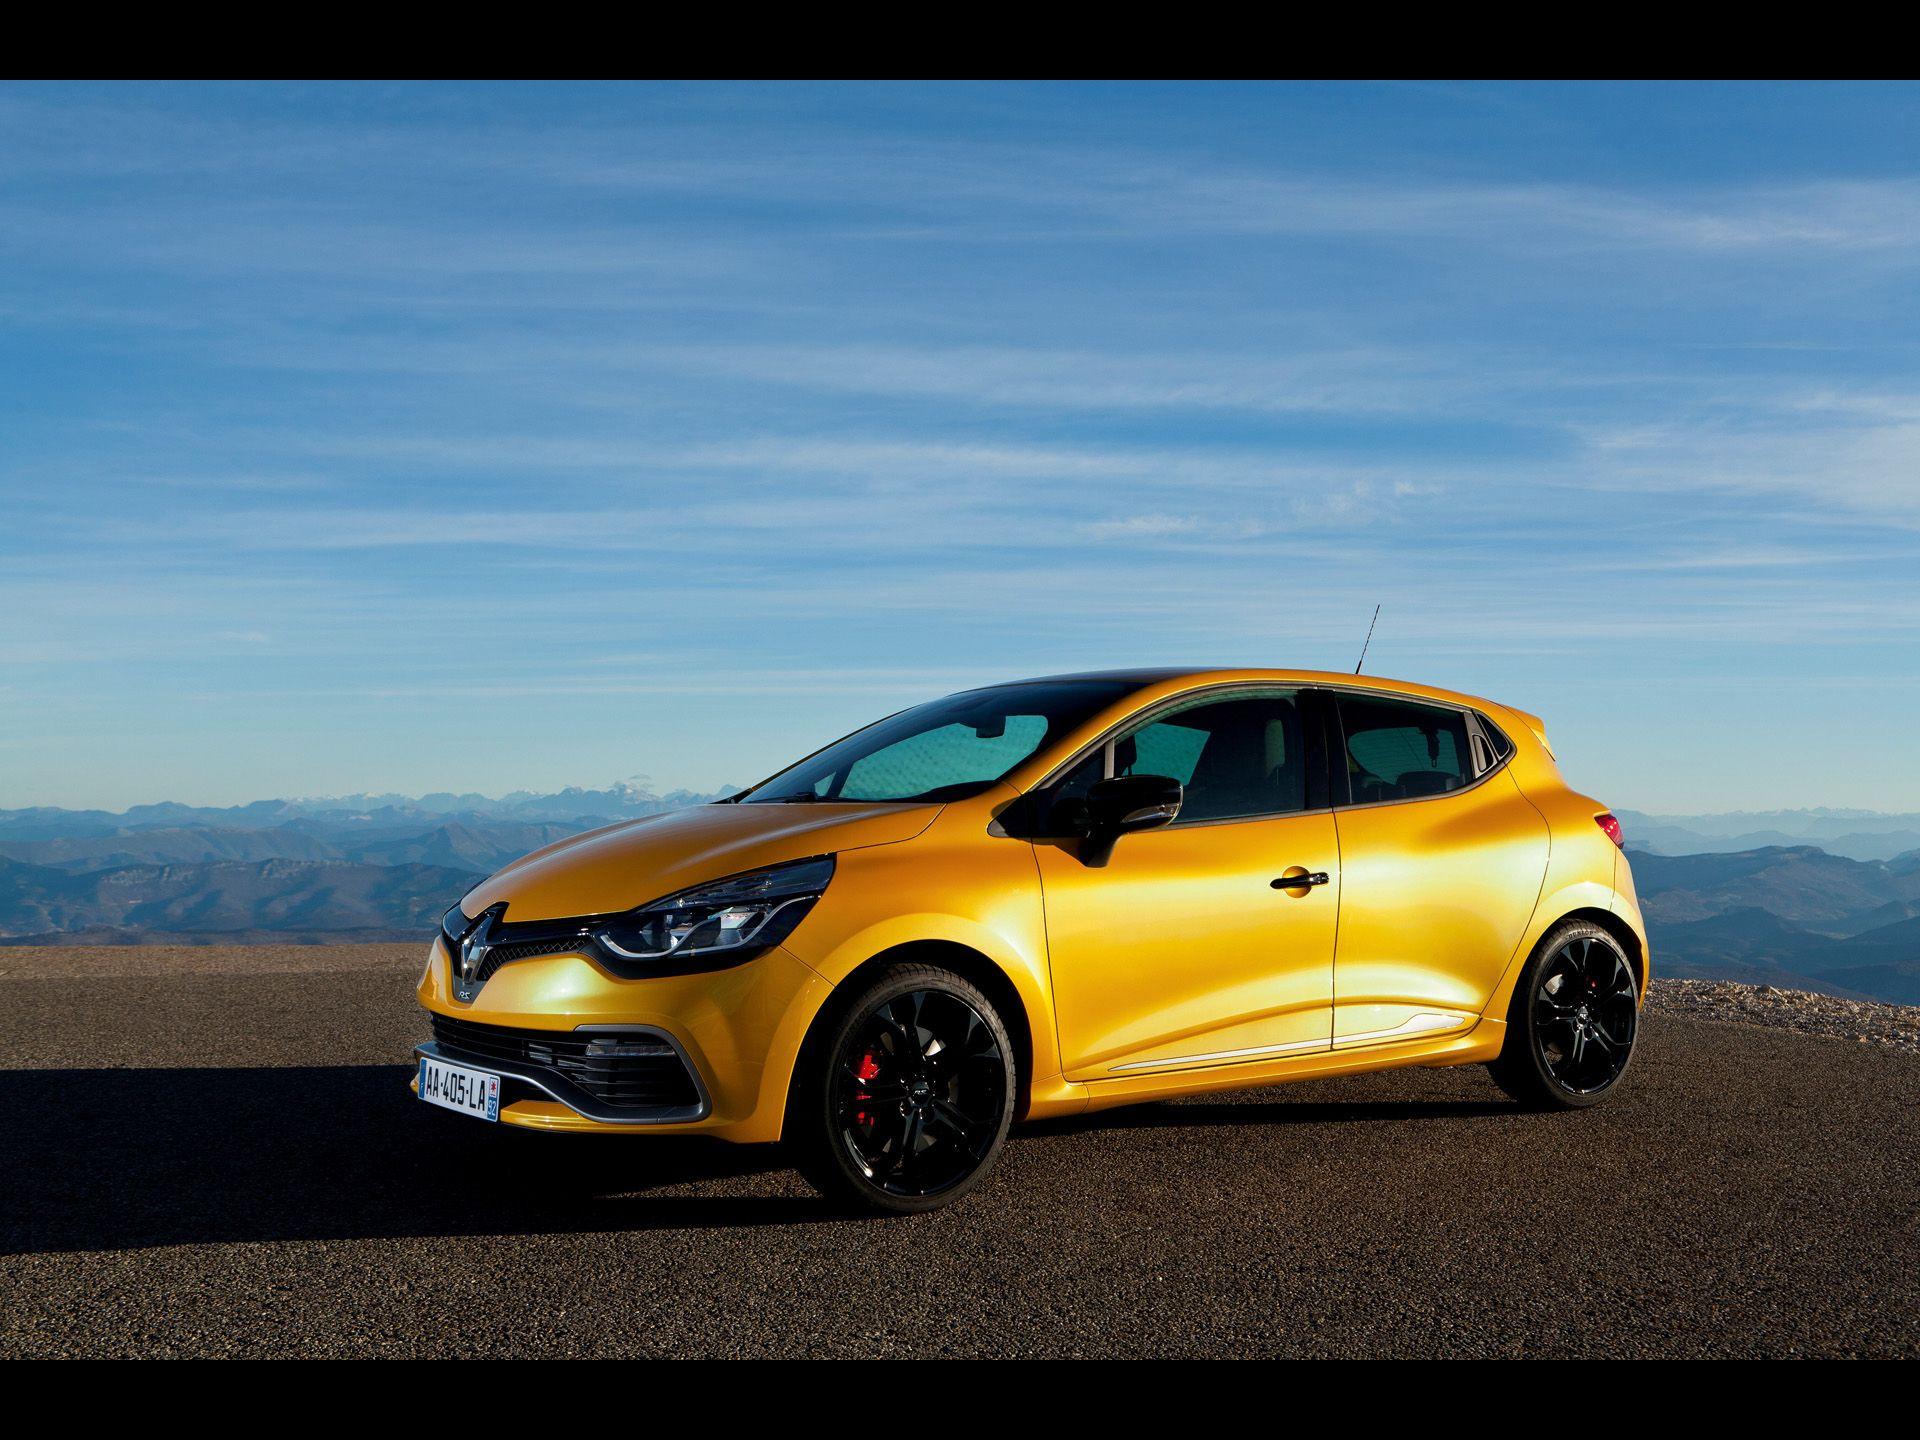 2013 Renault Clio Rs 200 Edc HD Wallpaper. Background